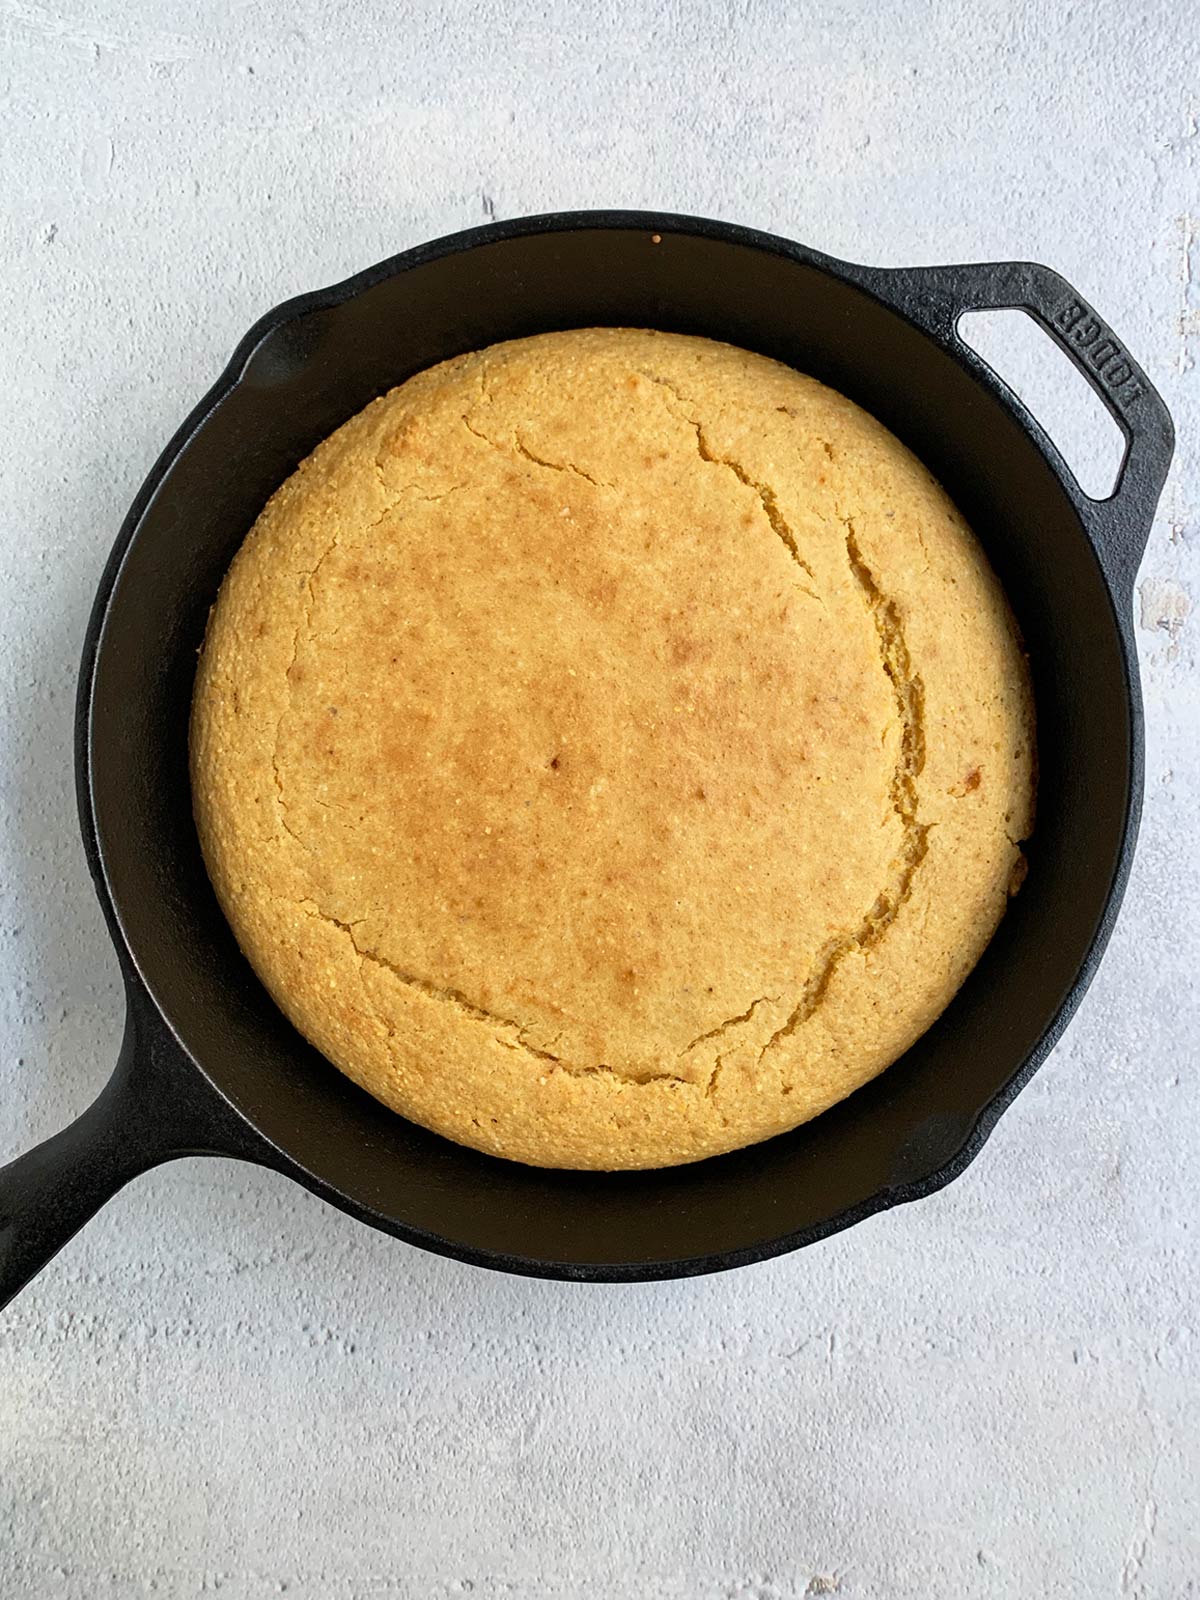 Dairy-free cornbread in a cast iron pan on a blue background.